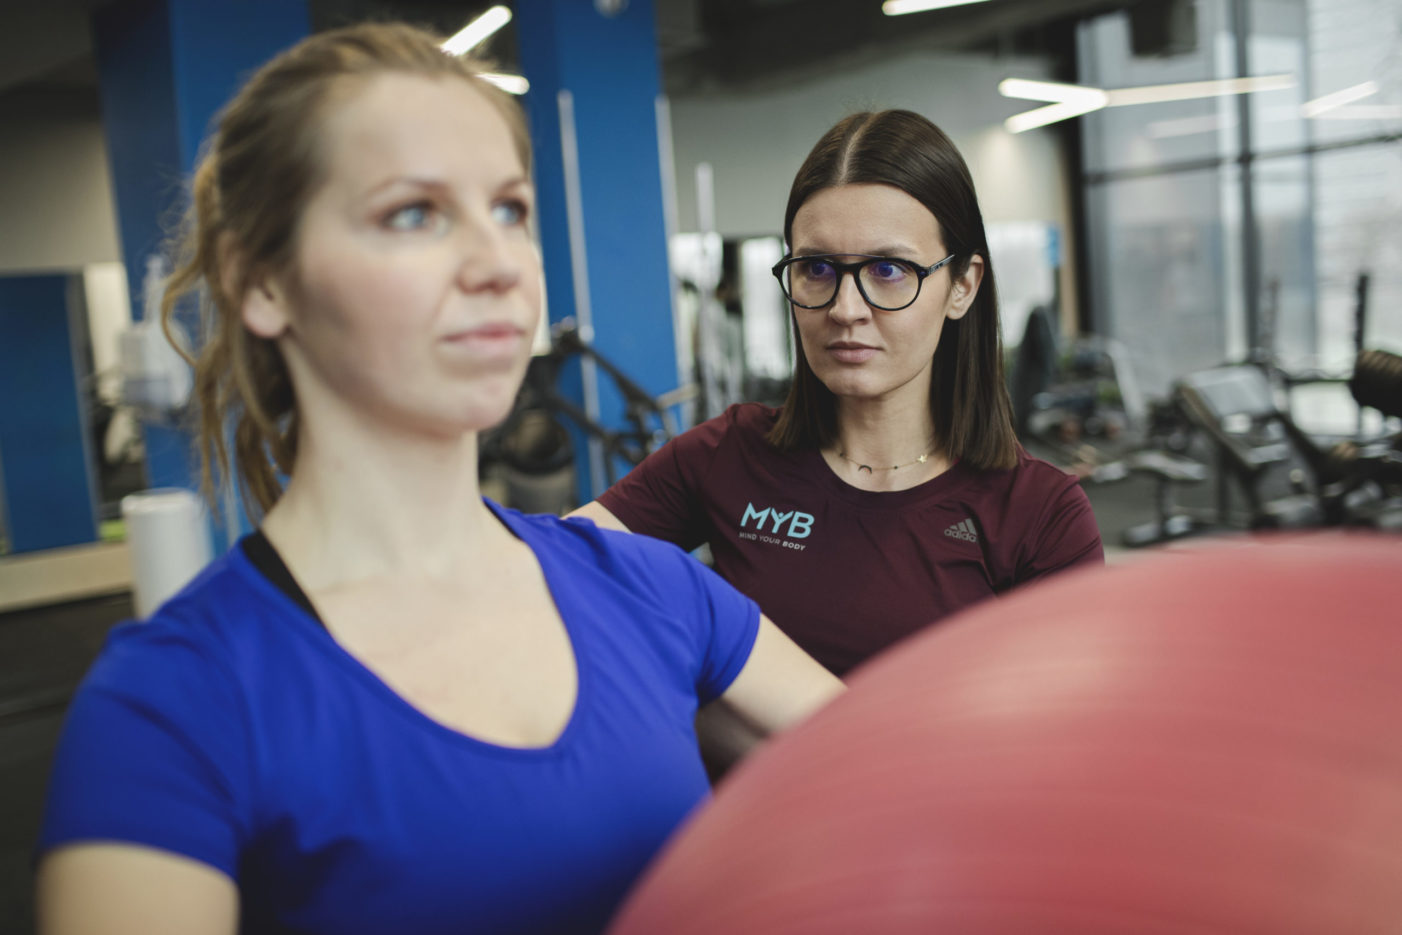 HOW TO CHOOSE A GOOD PERSONAL TRAINER?